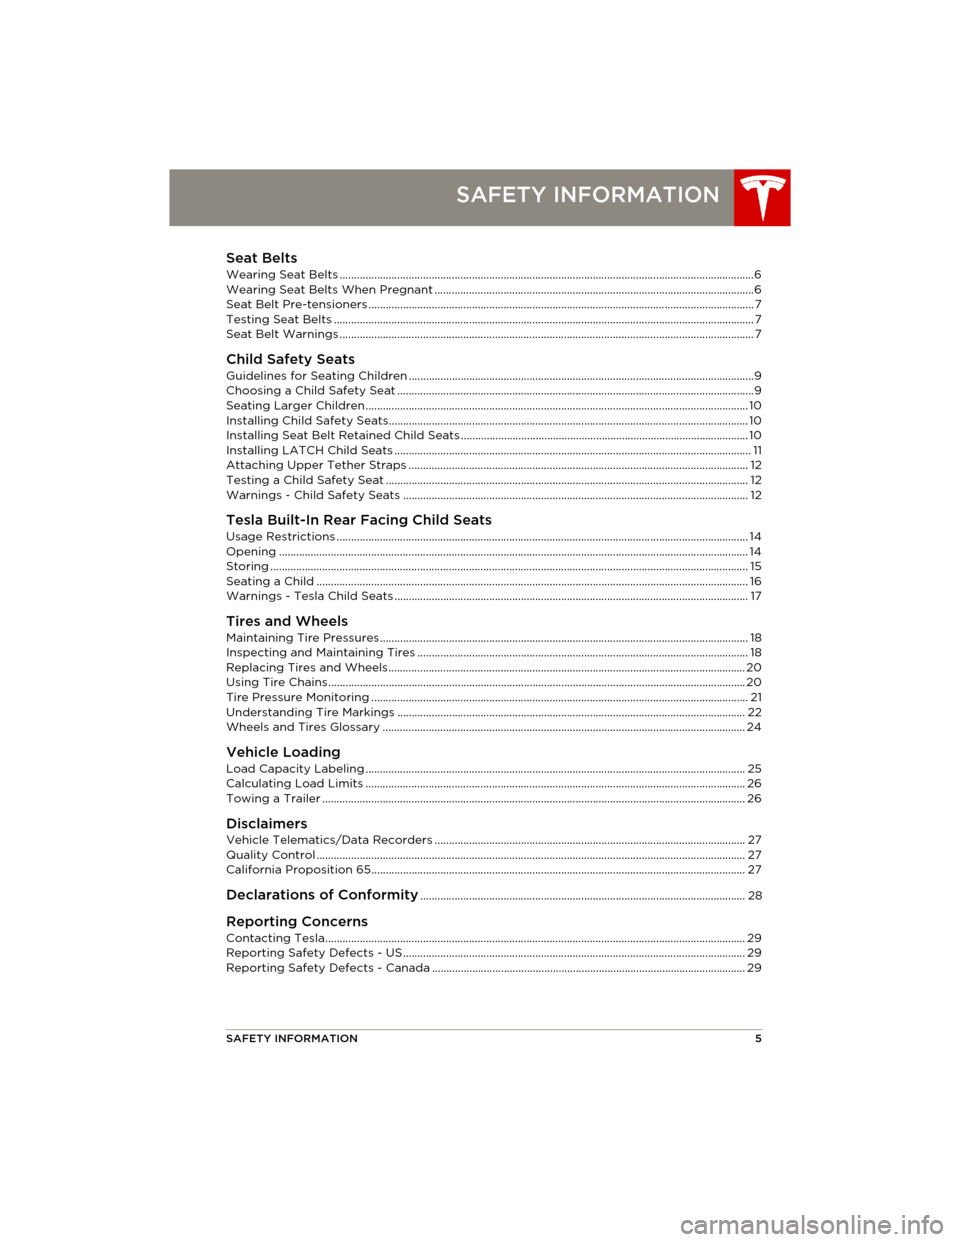 TESLA MODEL S 2014  Quick Guide (North America)  SAFETY INFORMATION5
SAFETY INFORMATION
Seat Belts
Wearing Seat Belts ...................................................................................................................................